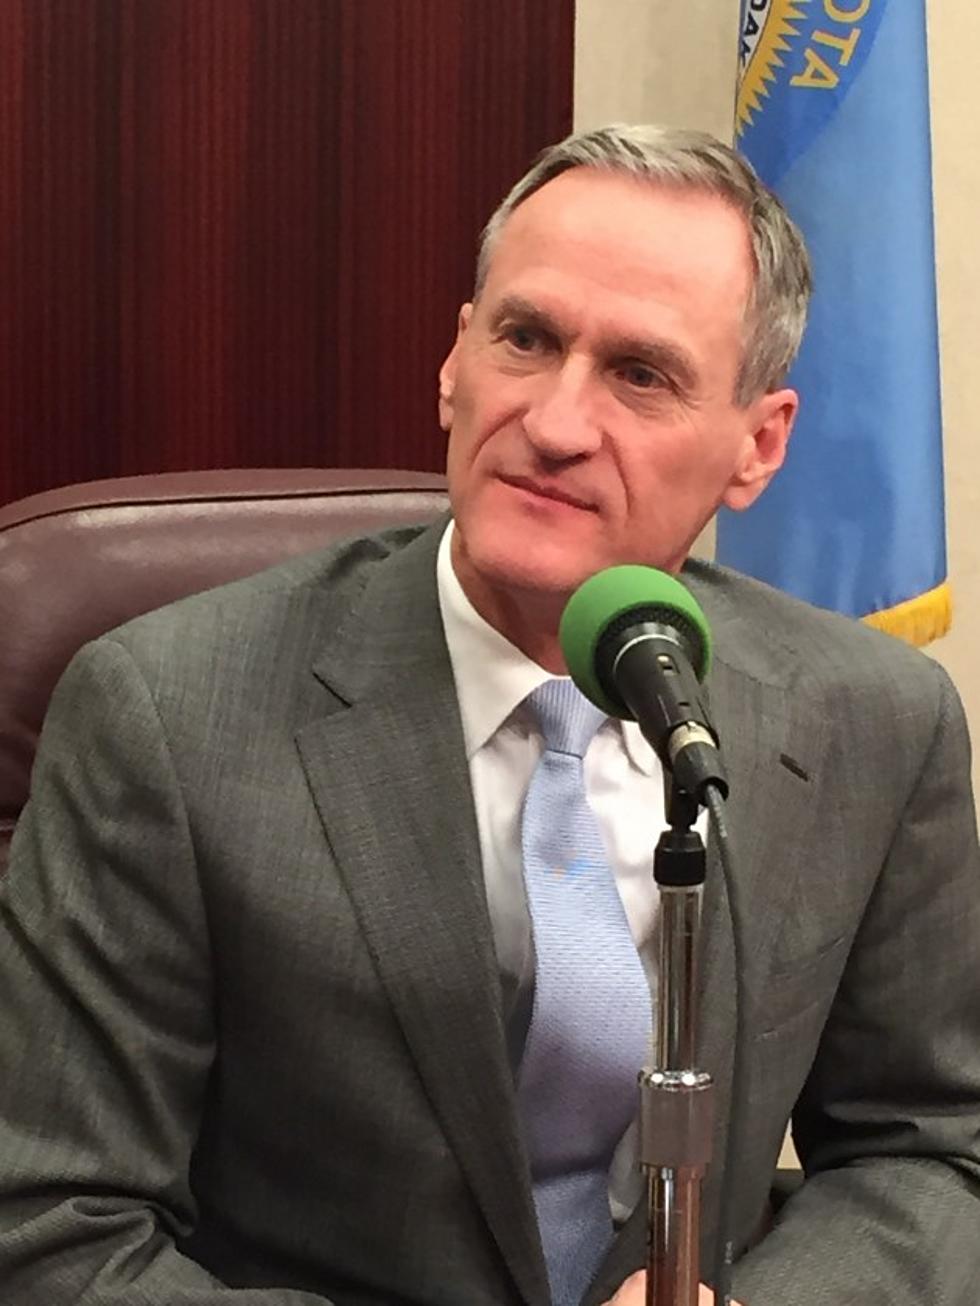 South Dakota Governor Should Veto Separate and Unequal Law